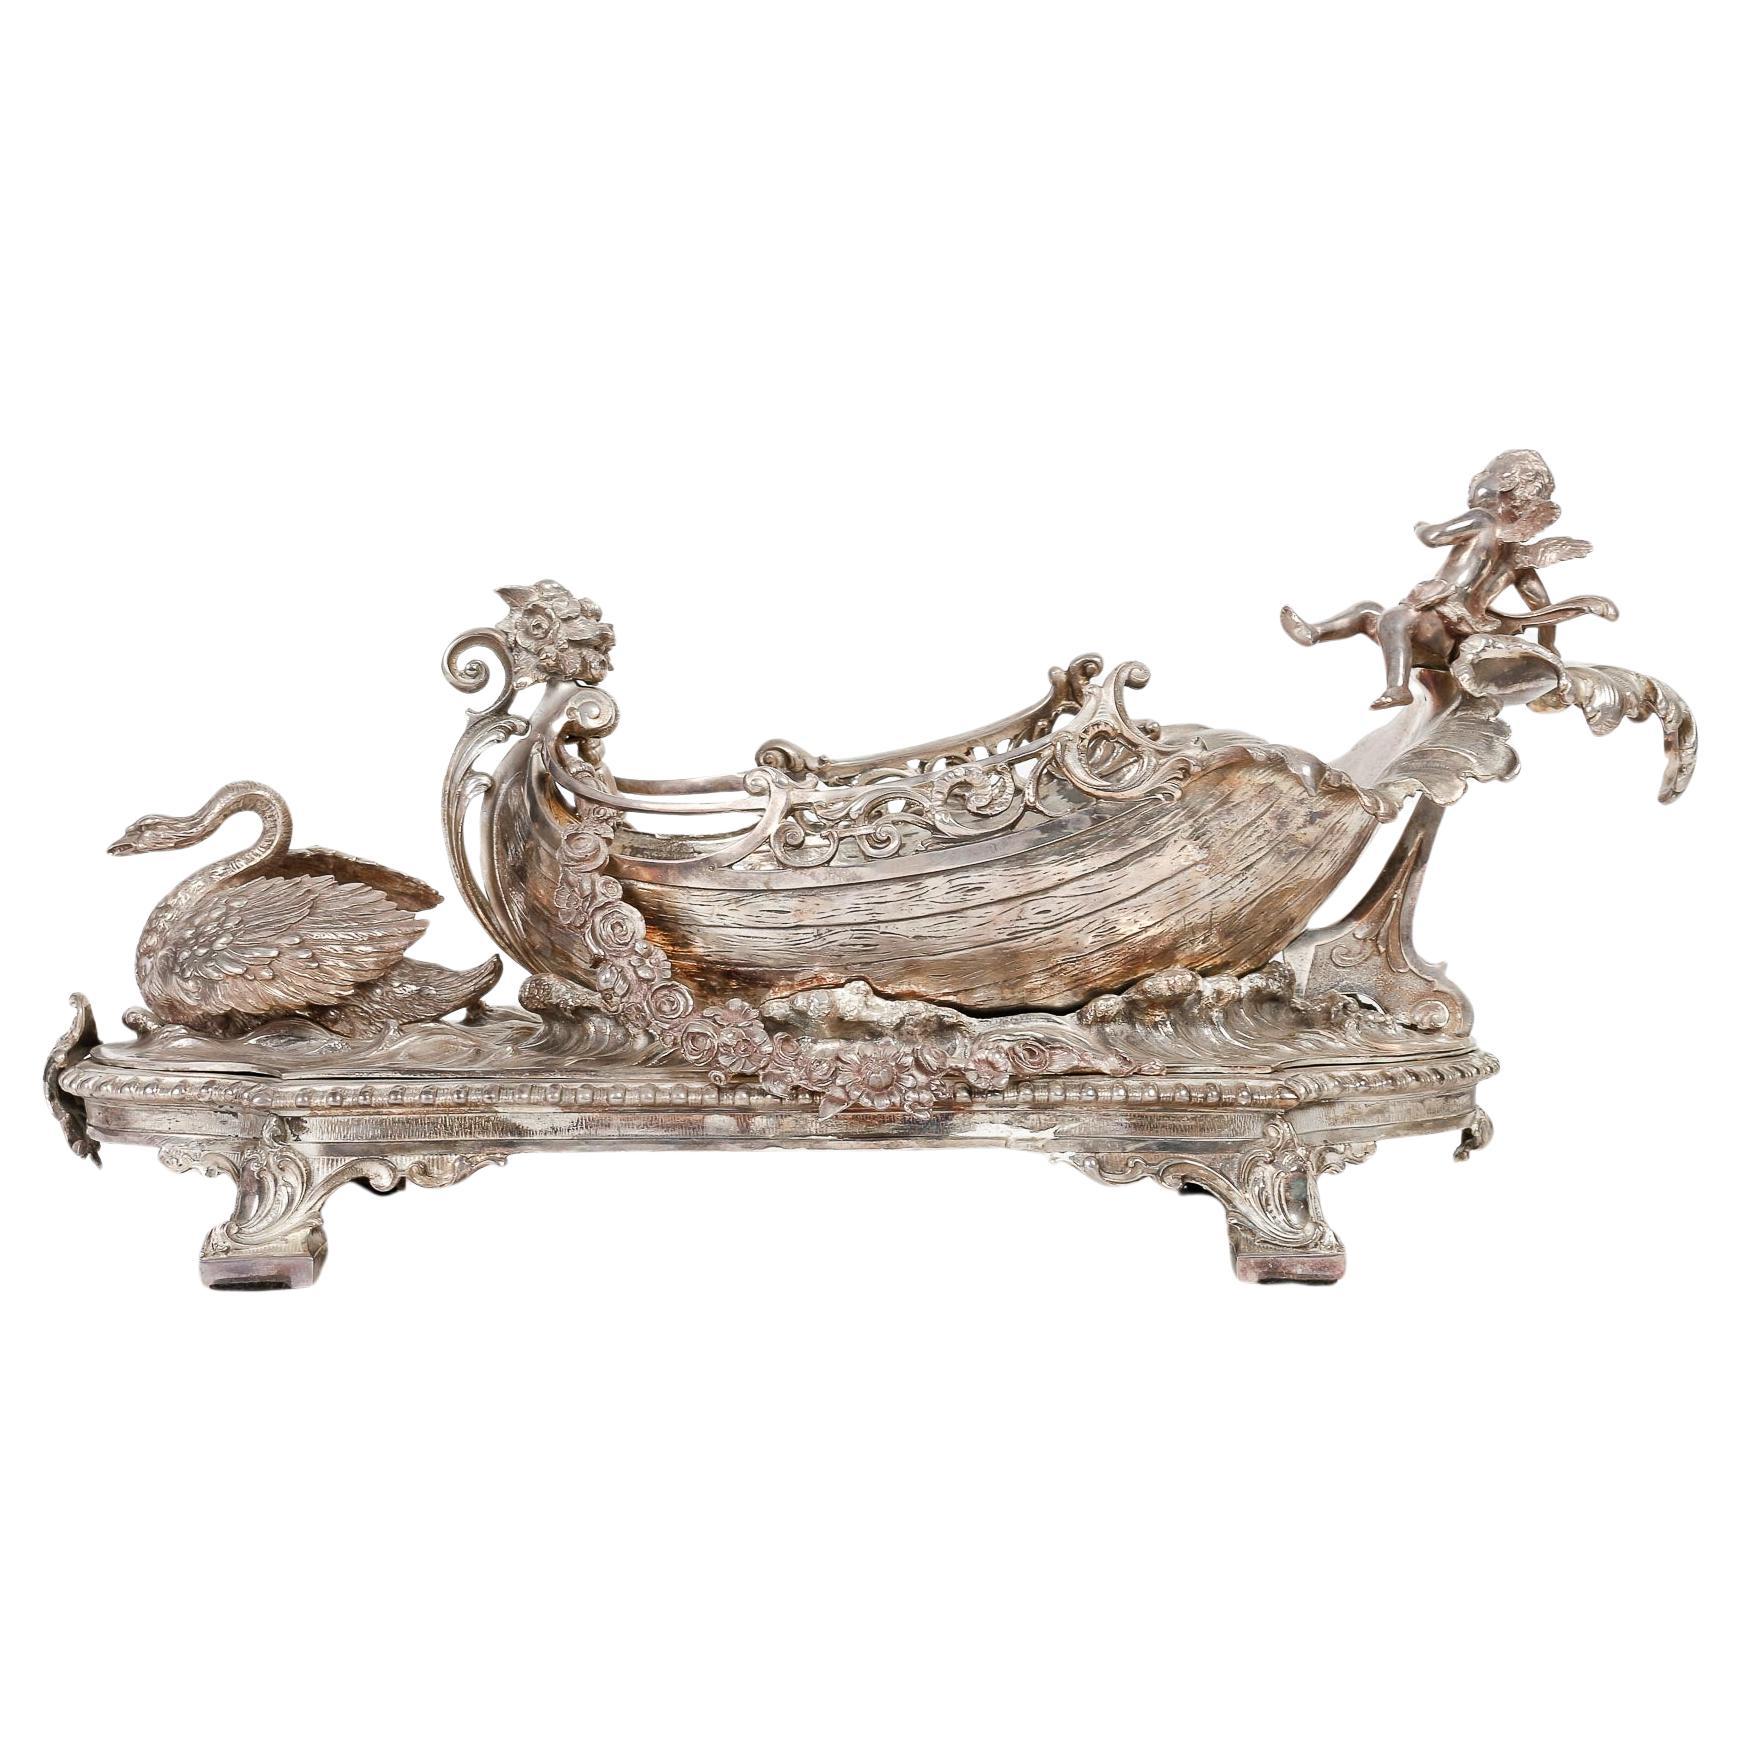 Silver Plated Metal Fruit Bowl, Centerpiece, 19th Century, Napoleon III Period. For Sale